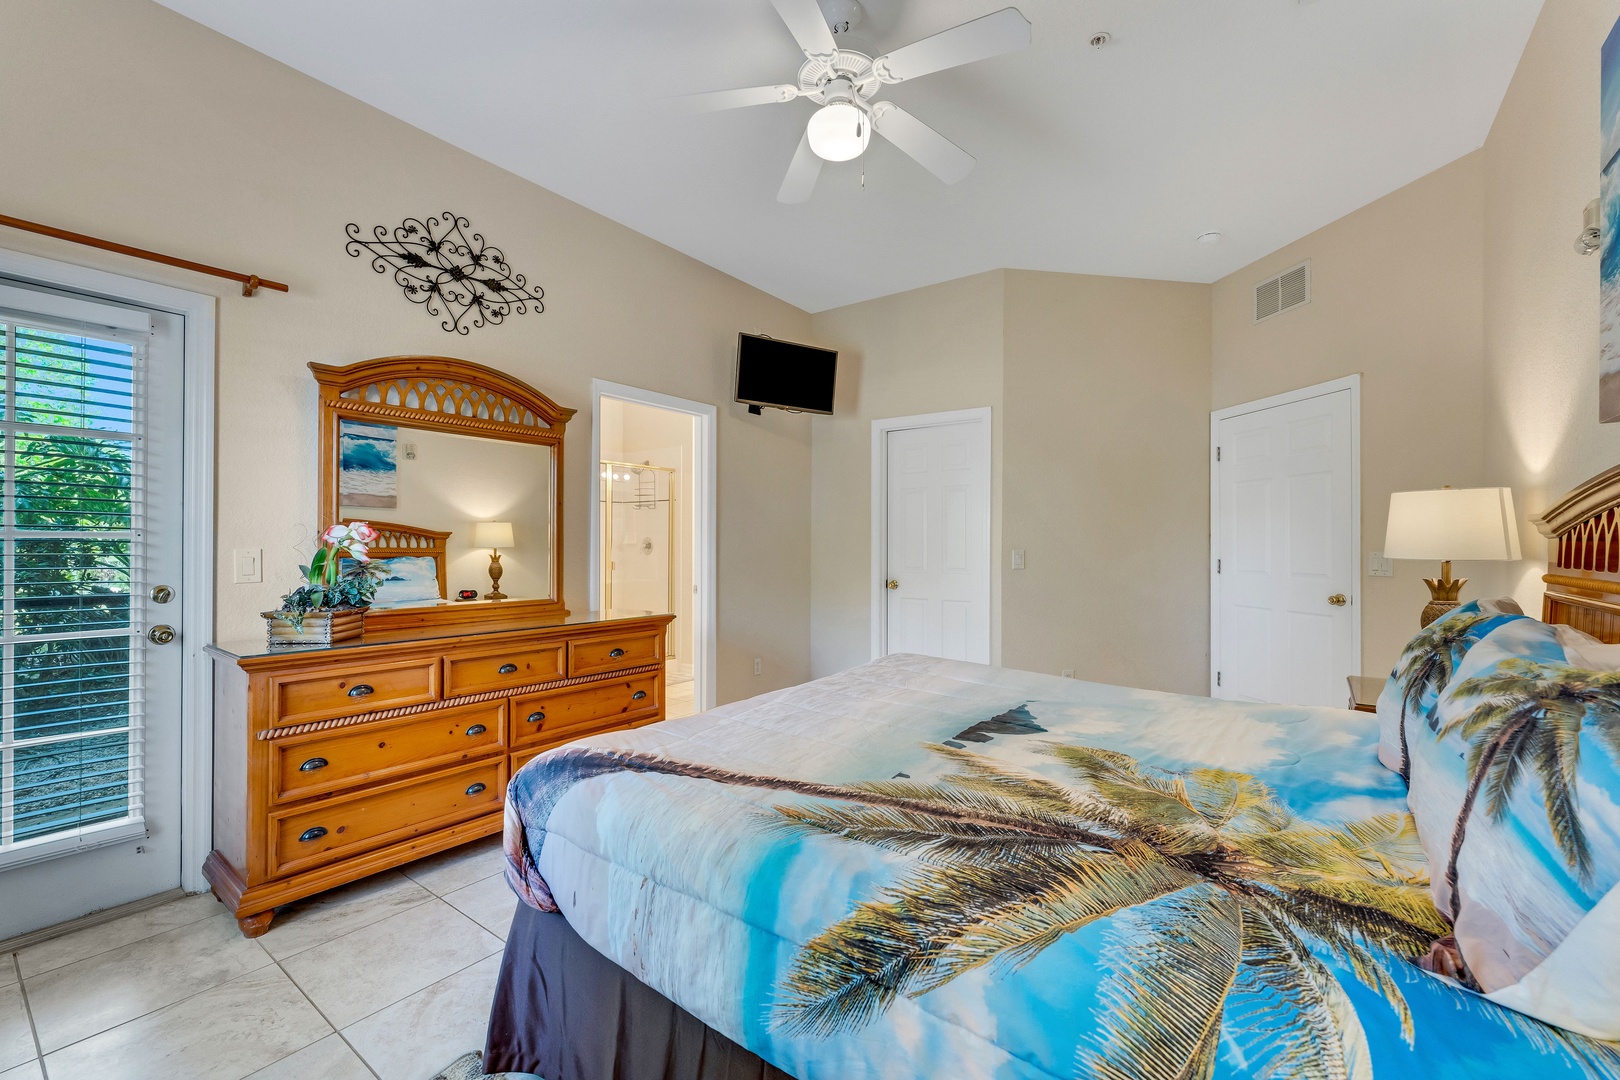 This spacious king suite boasts a private ensuite, TV, & patio access